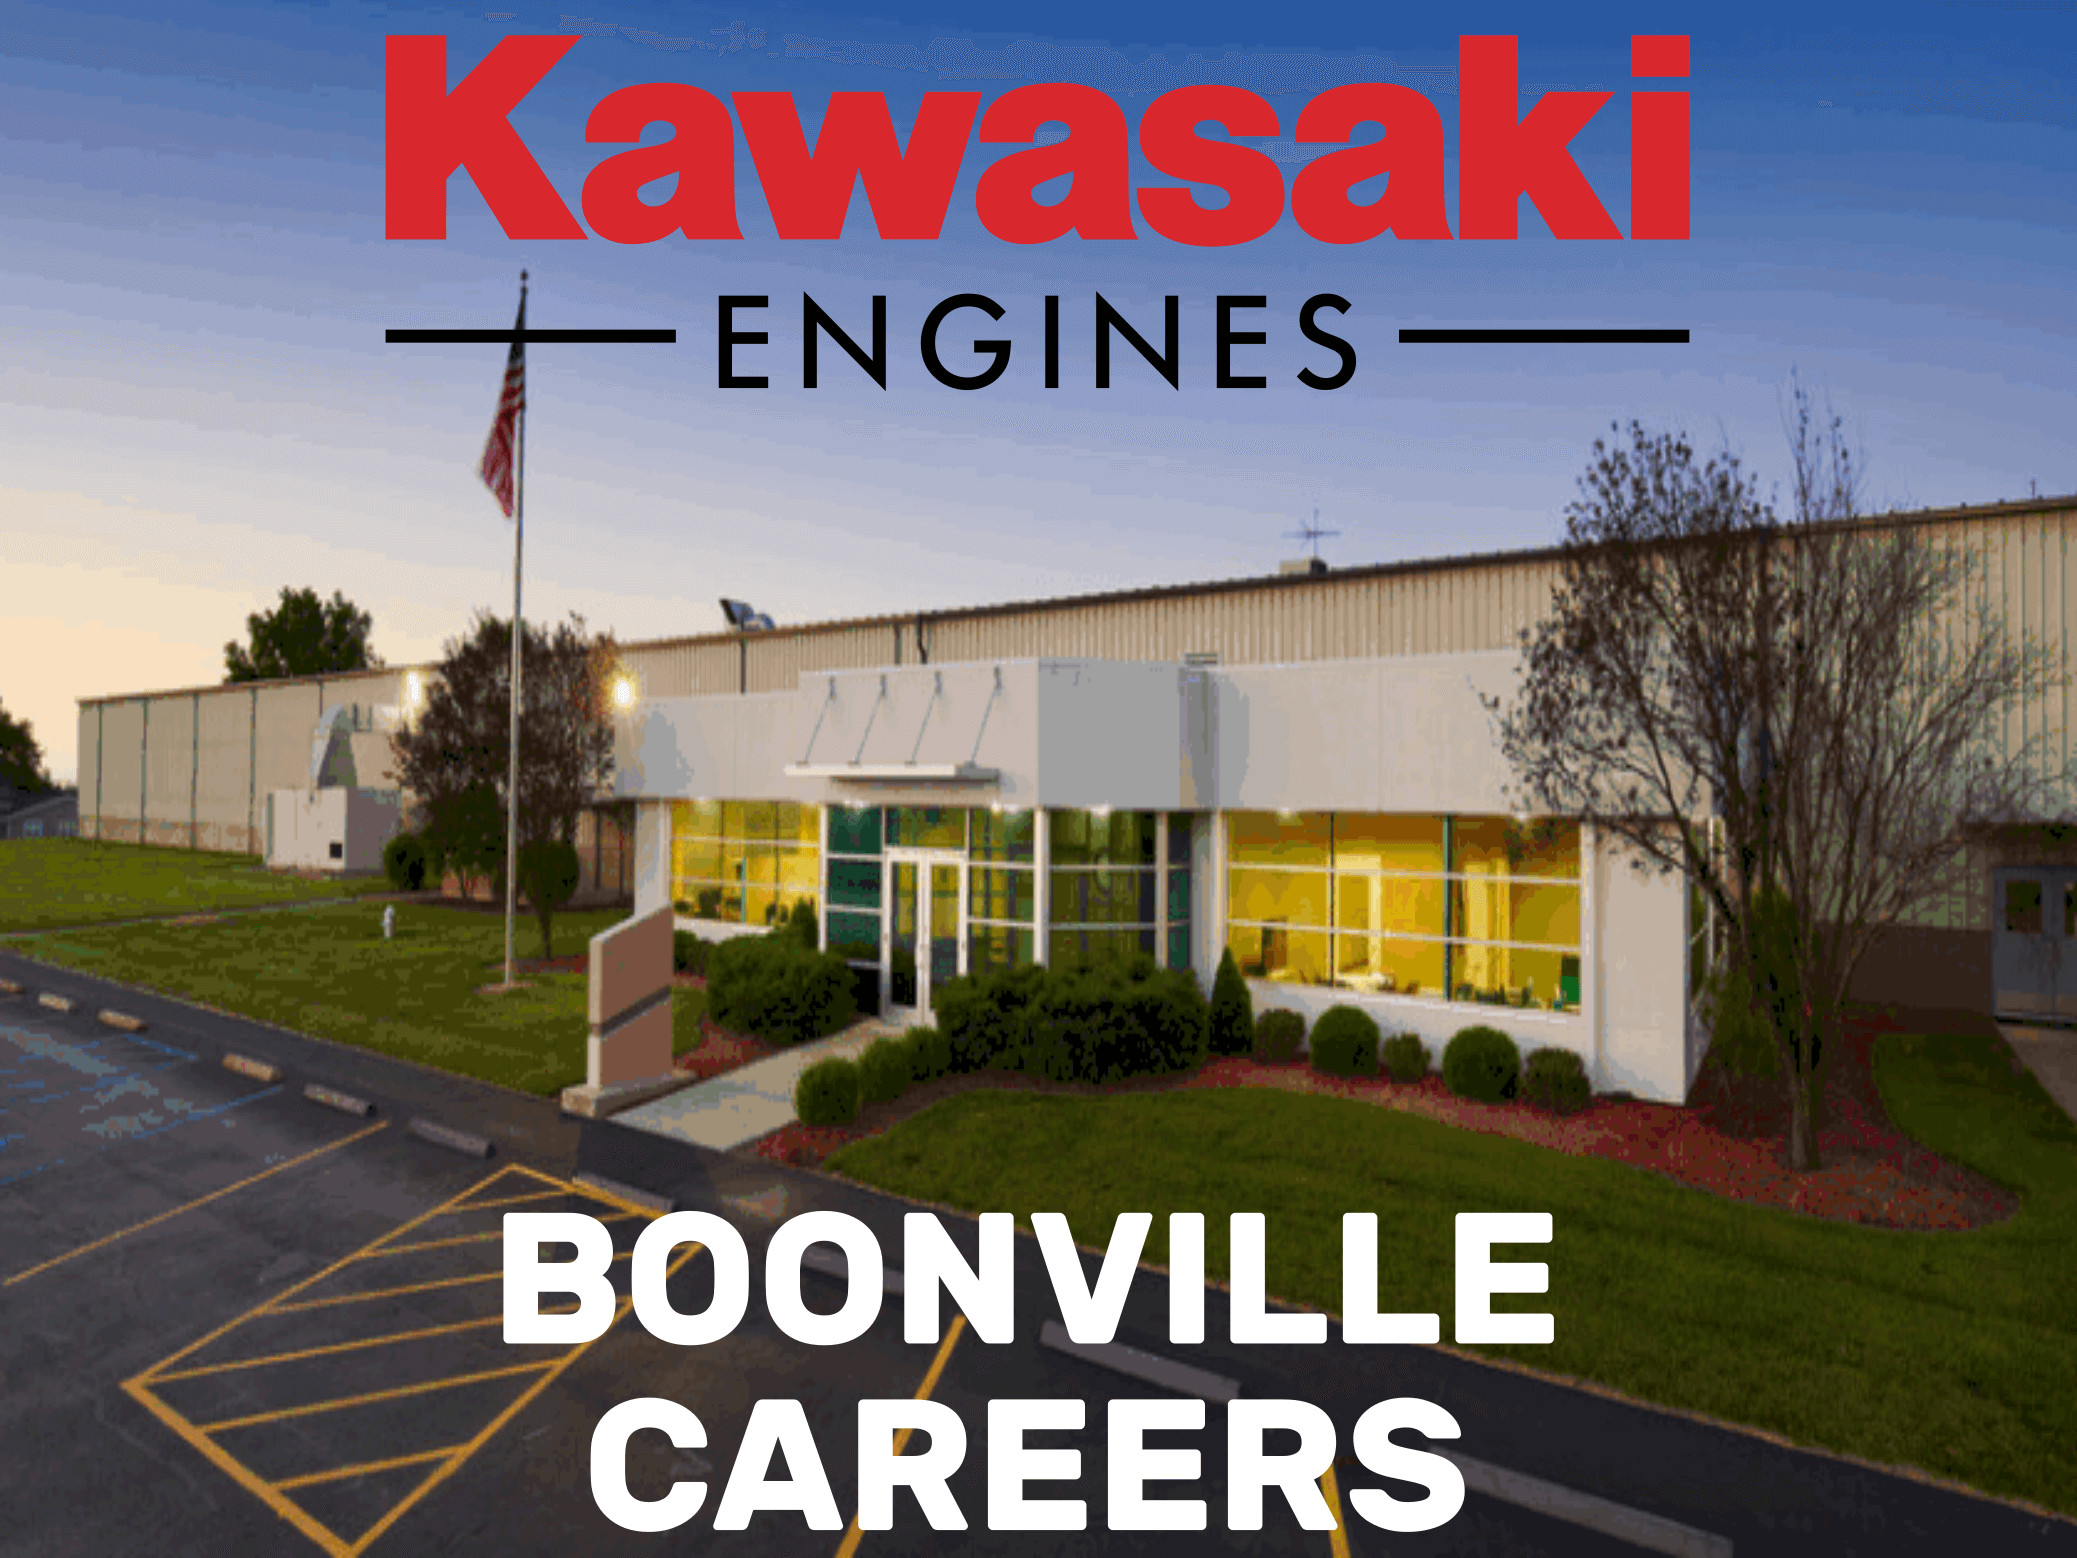 Boonville Careers